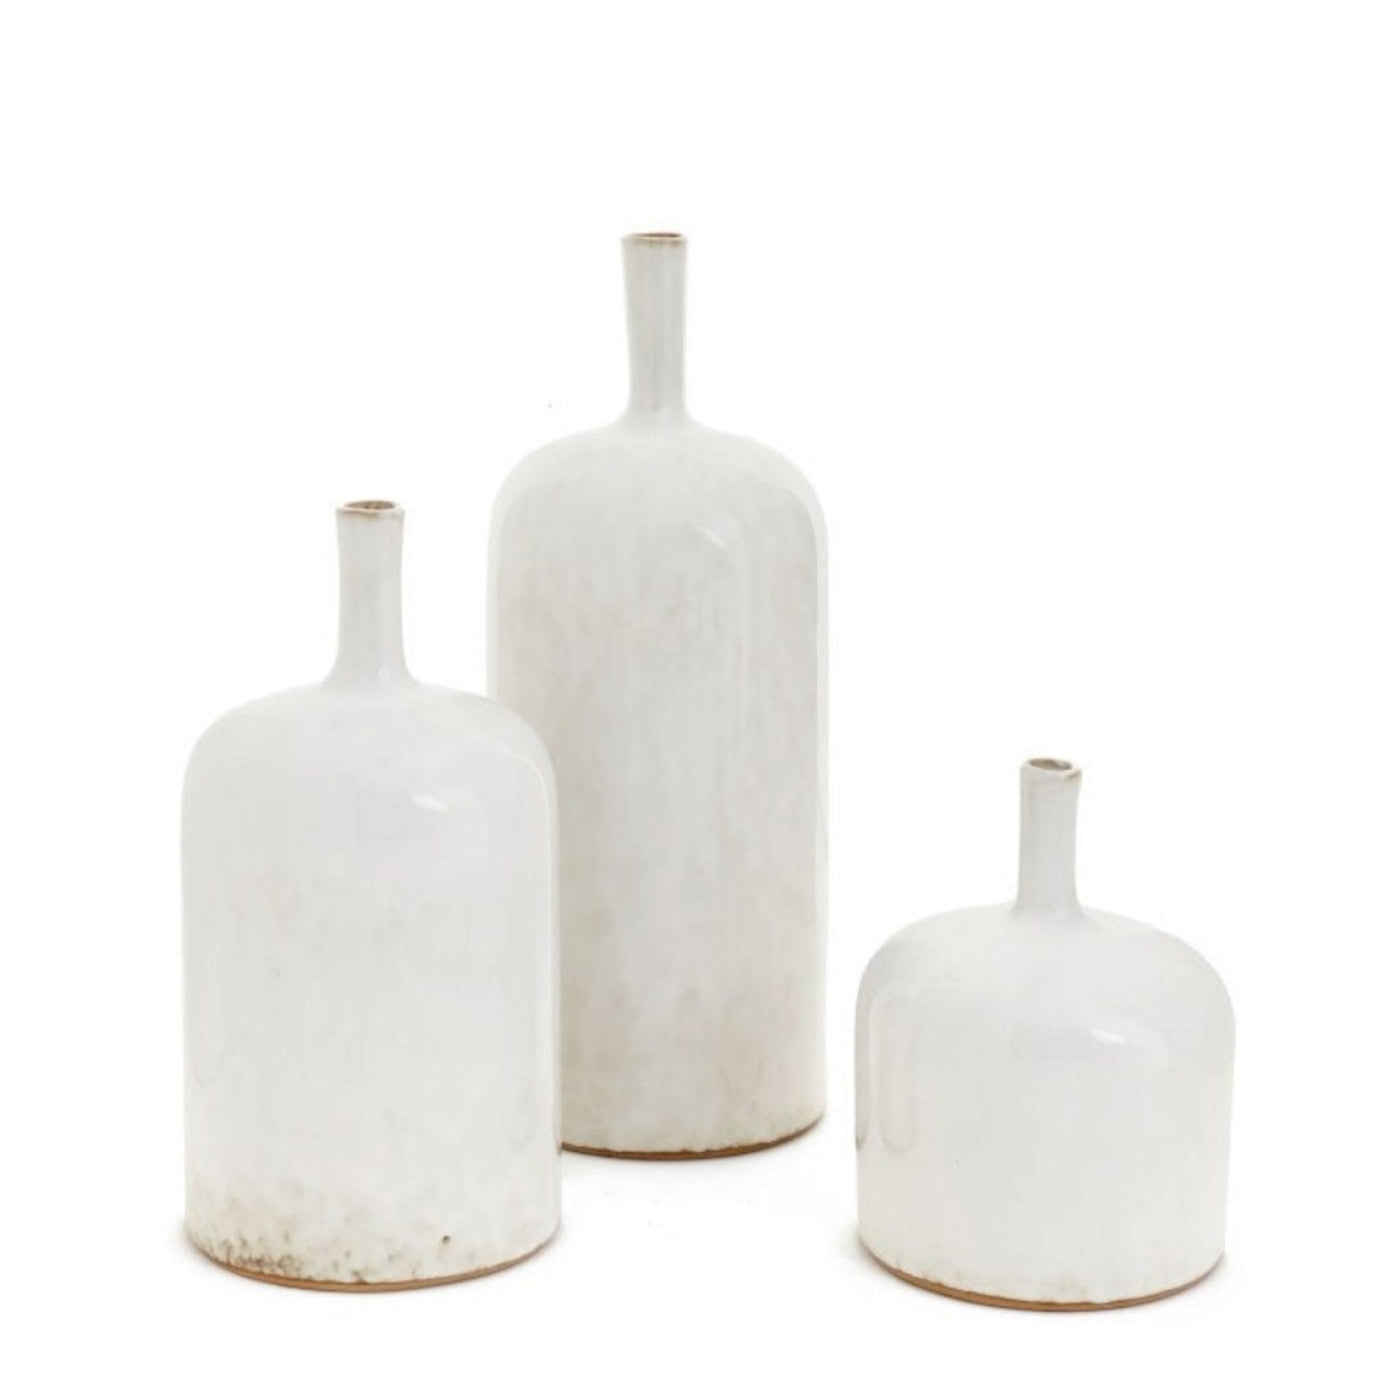 Stoneware Bottleneck Vases: Available in 3 sizes, each sold individually.